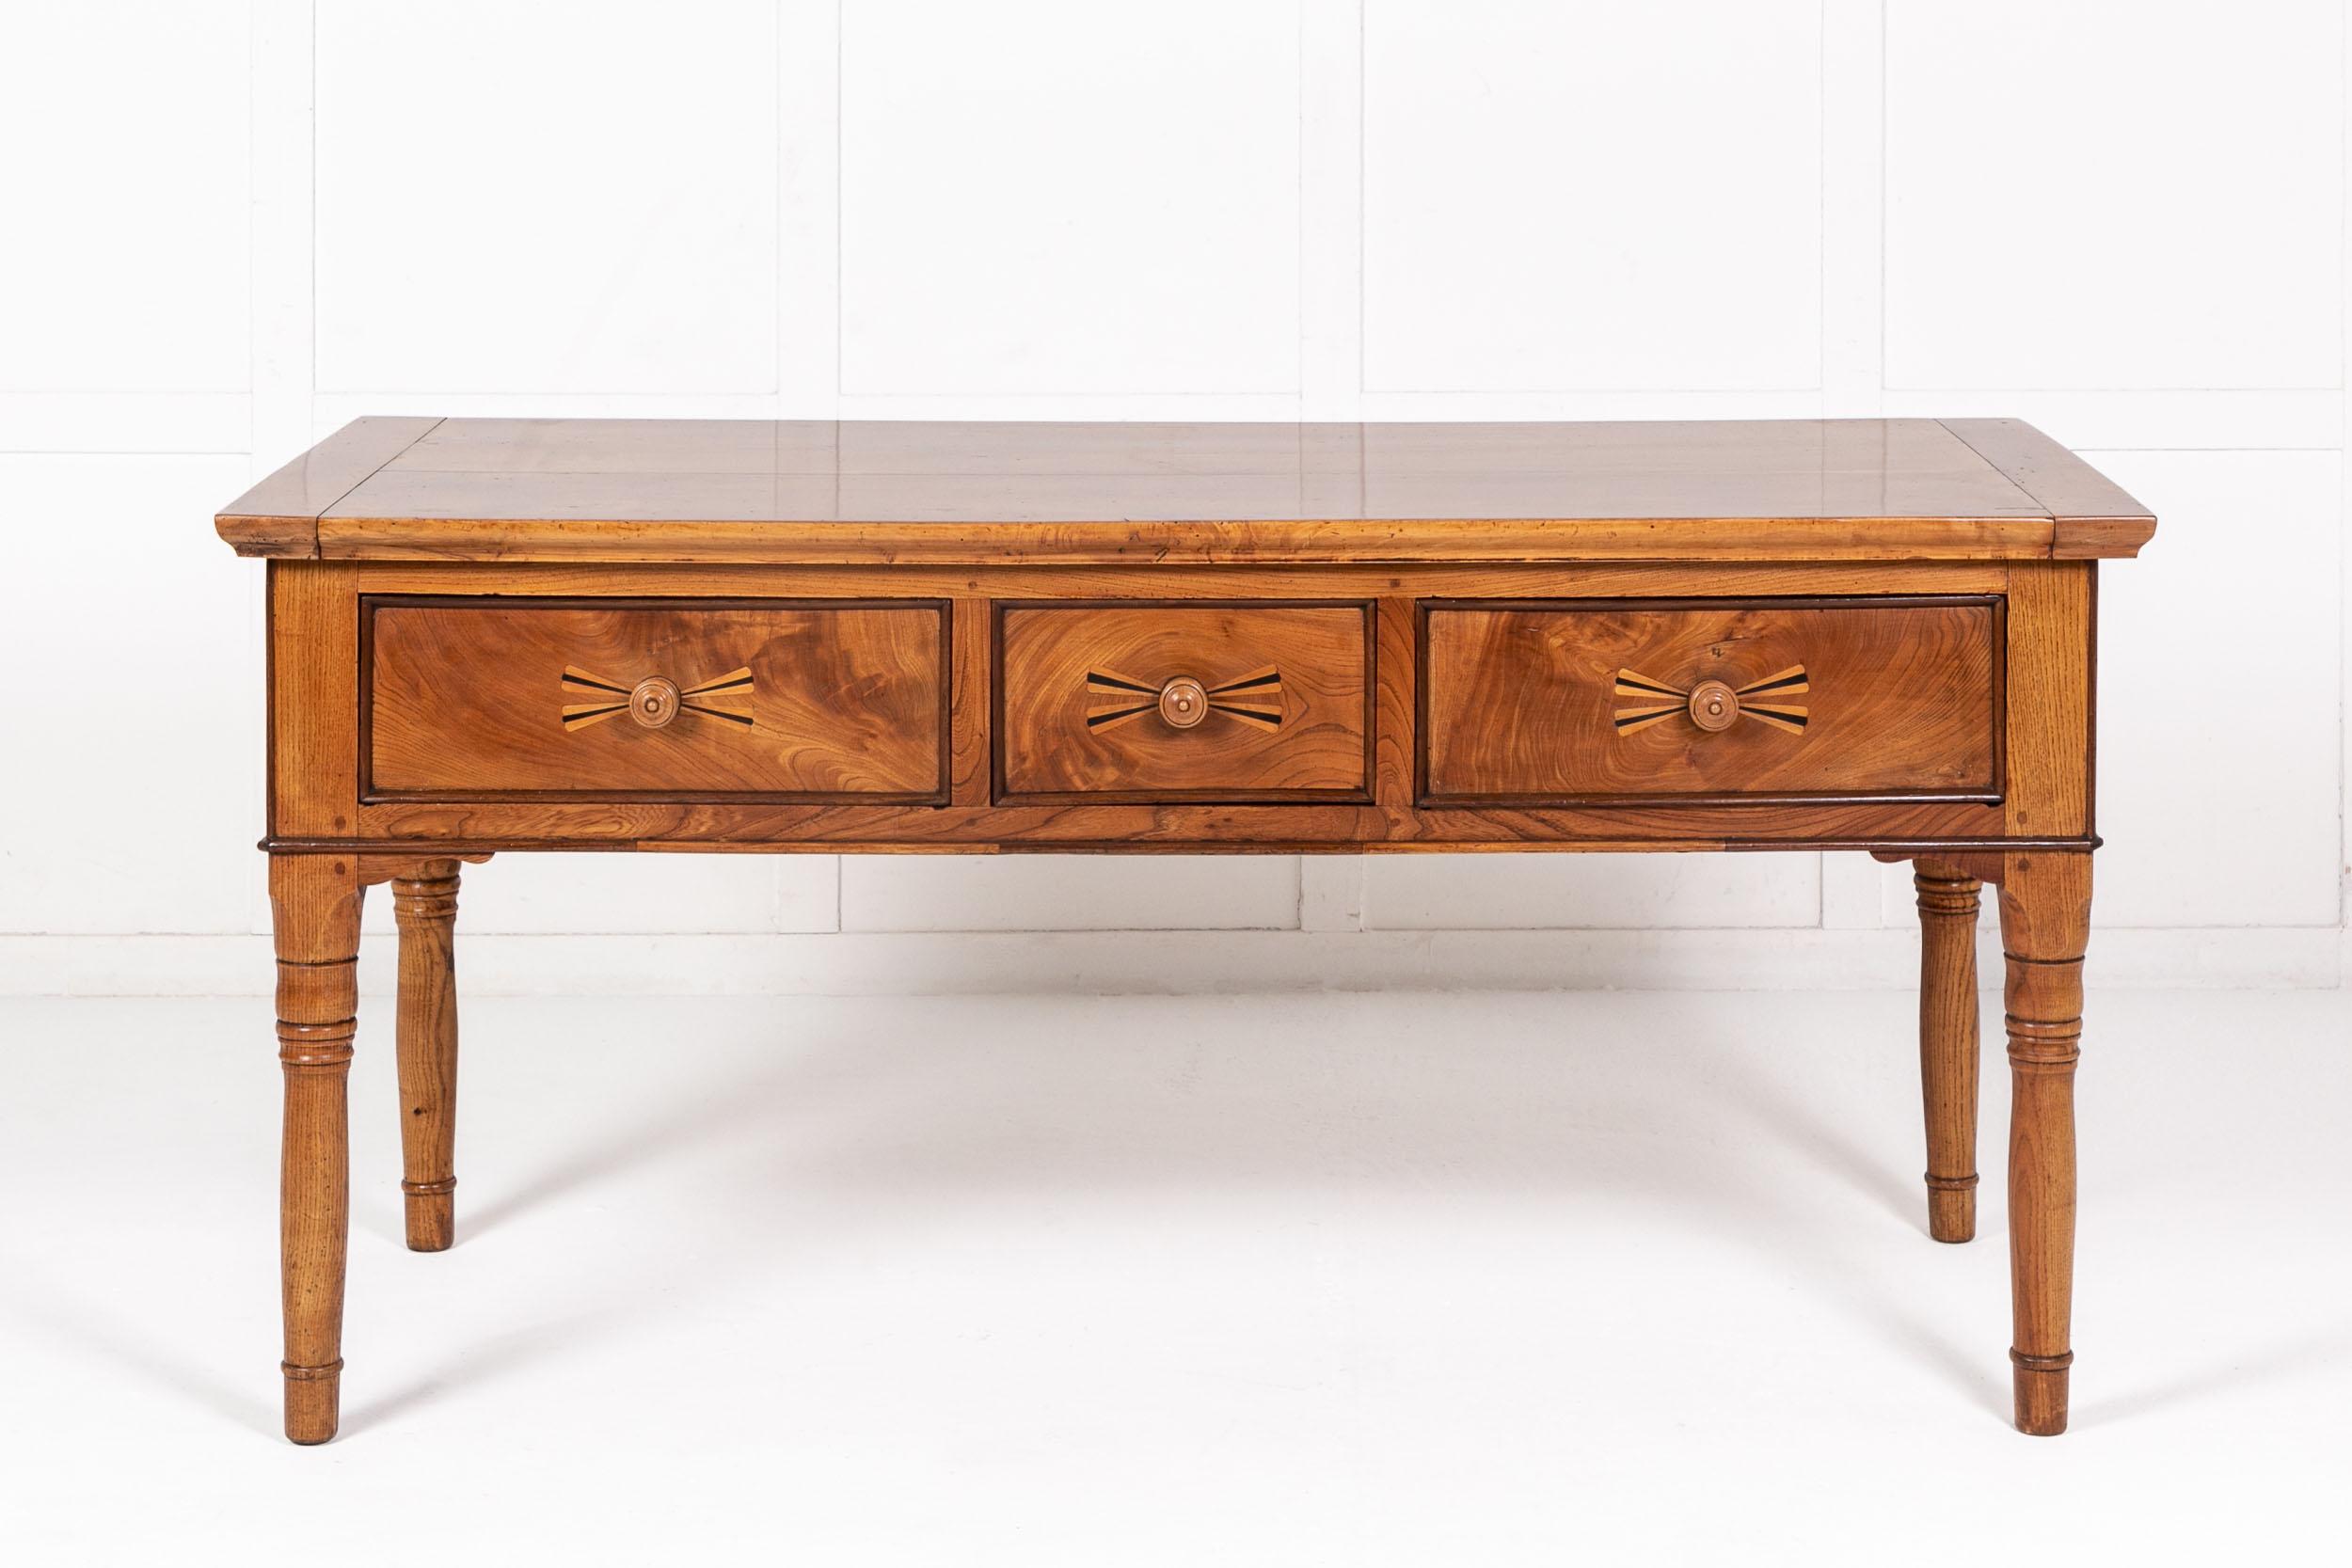 19th Century French maple and elm table. Having a two plank top with cleated ends. Three deep drawers below with central ribbon effect, of ebonised and elm wood inlay, with turned wooden pull handles. The whole is raised on turned